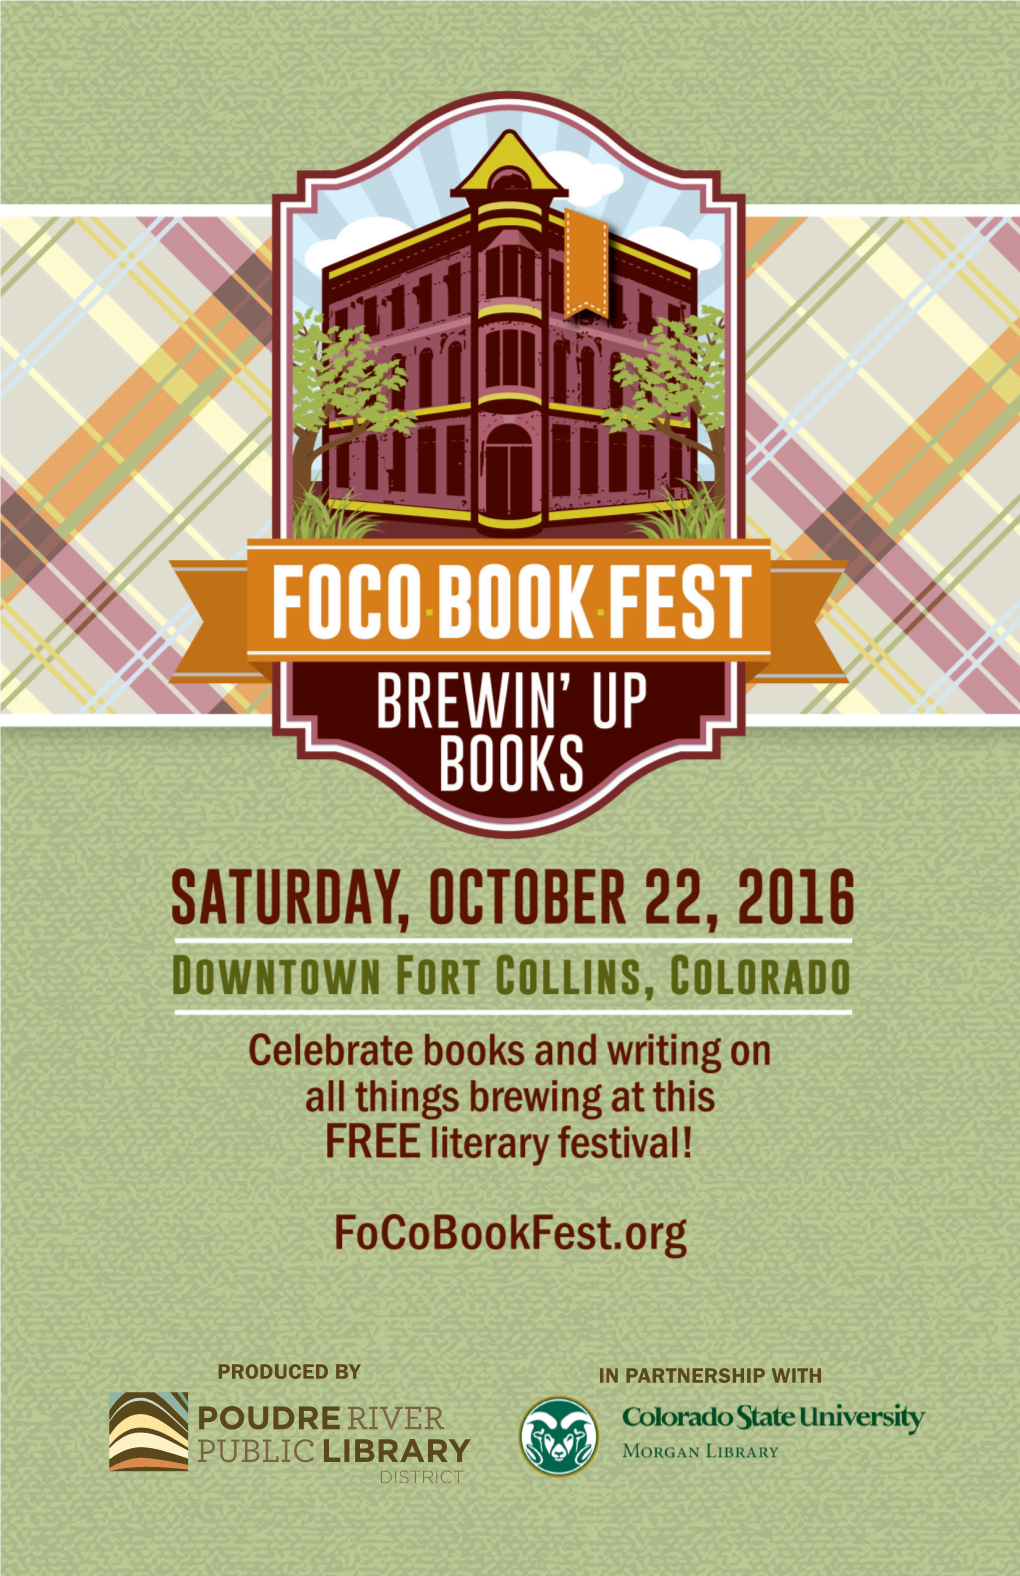 A Welcome Message from the Foco Book Fest Organizers We